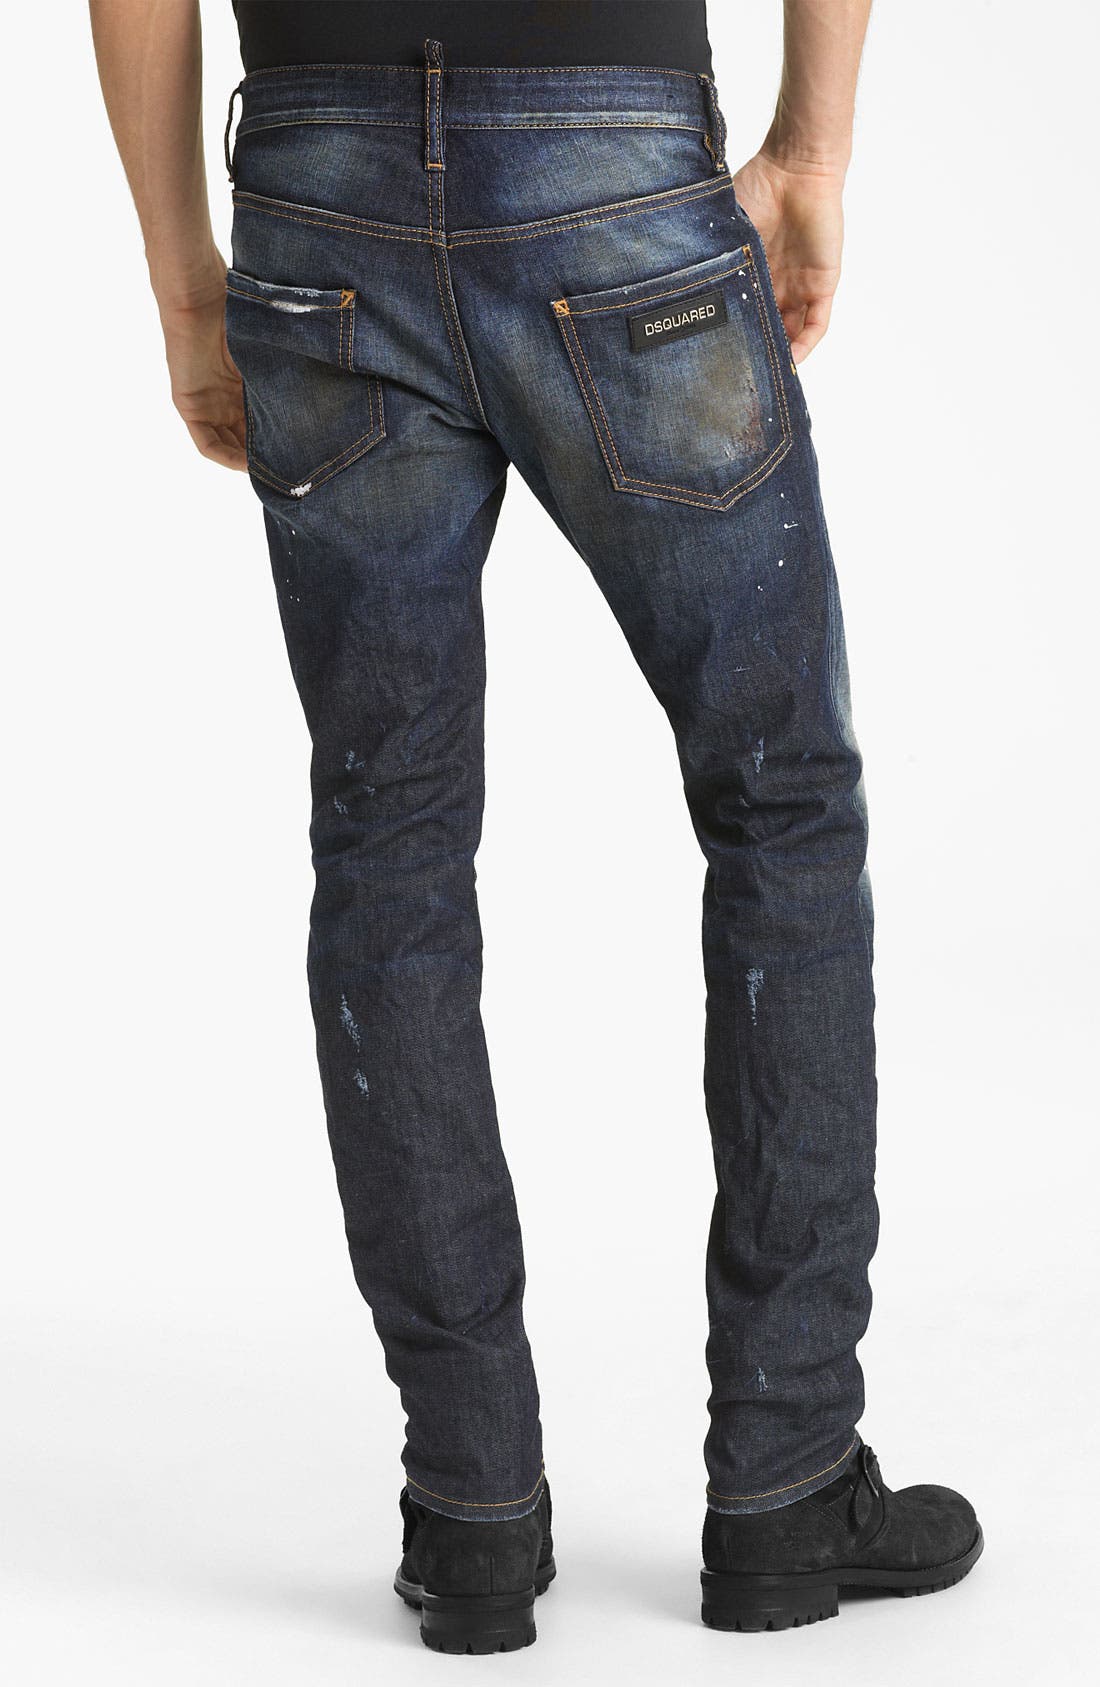 dsquared look a like jeans